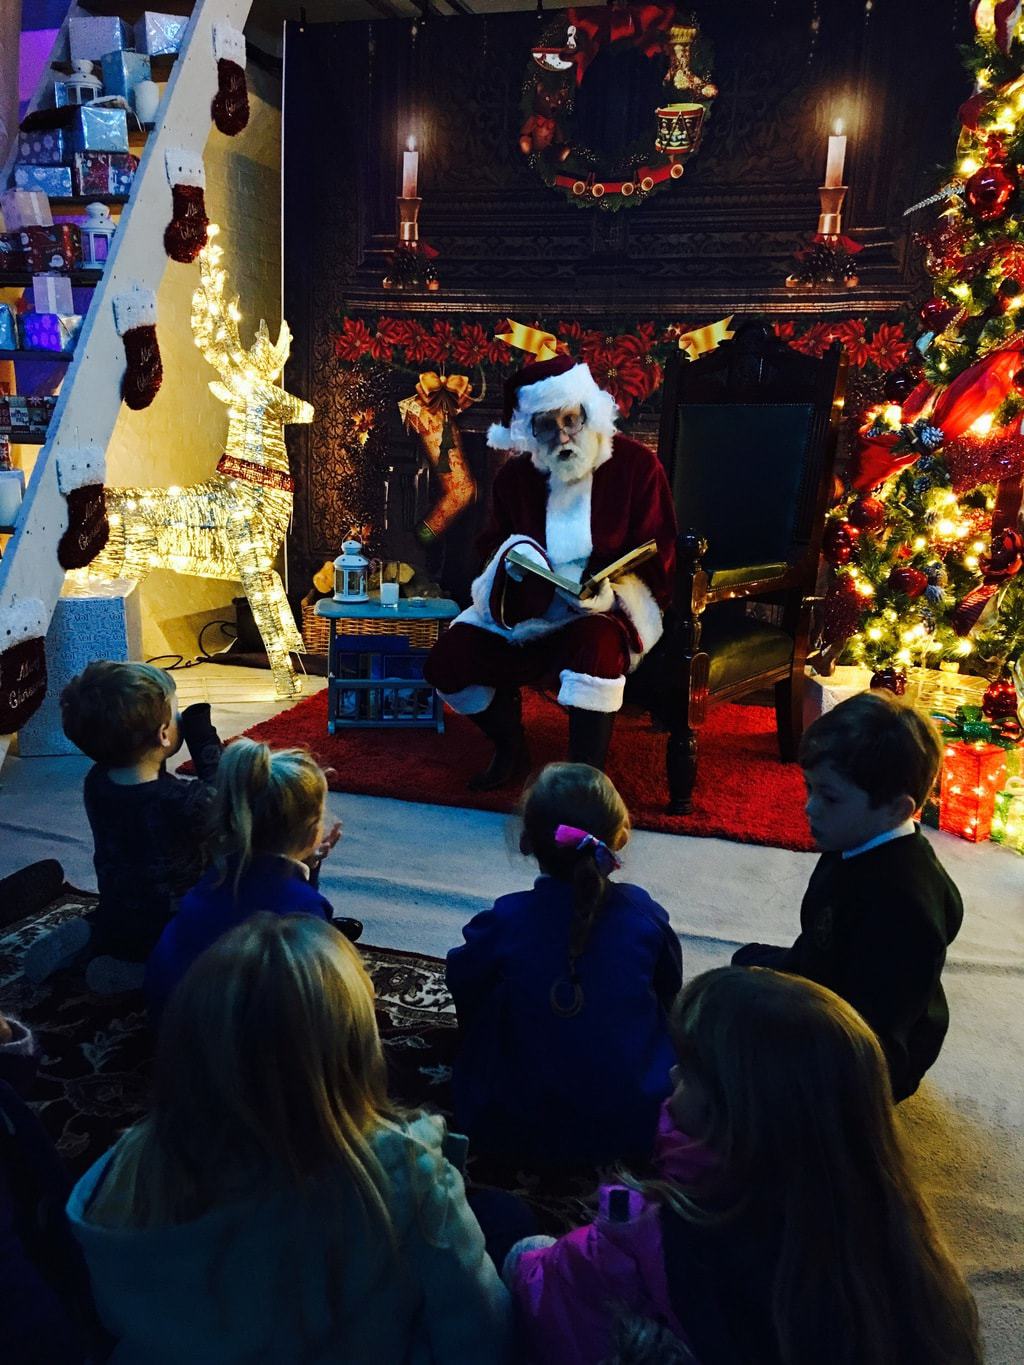 Storytime with Santa at St George's Hall Grotto www.minitravellers.co.uk